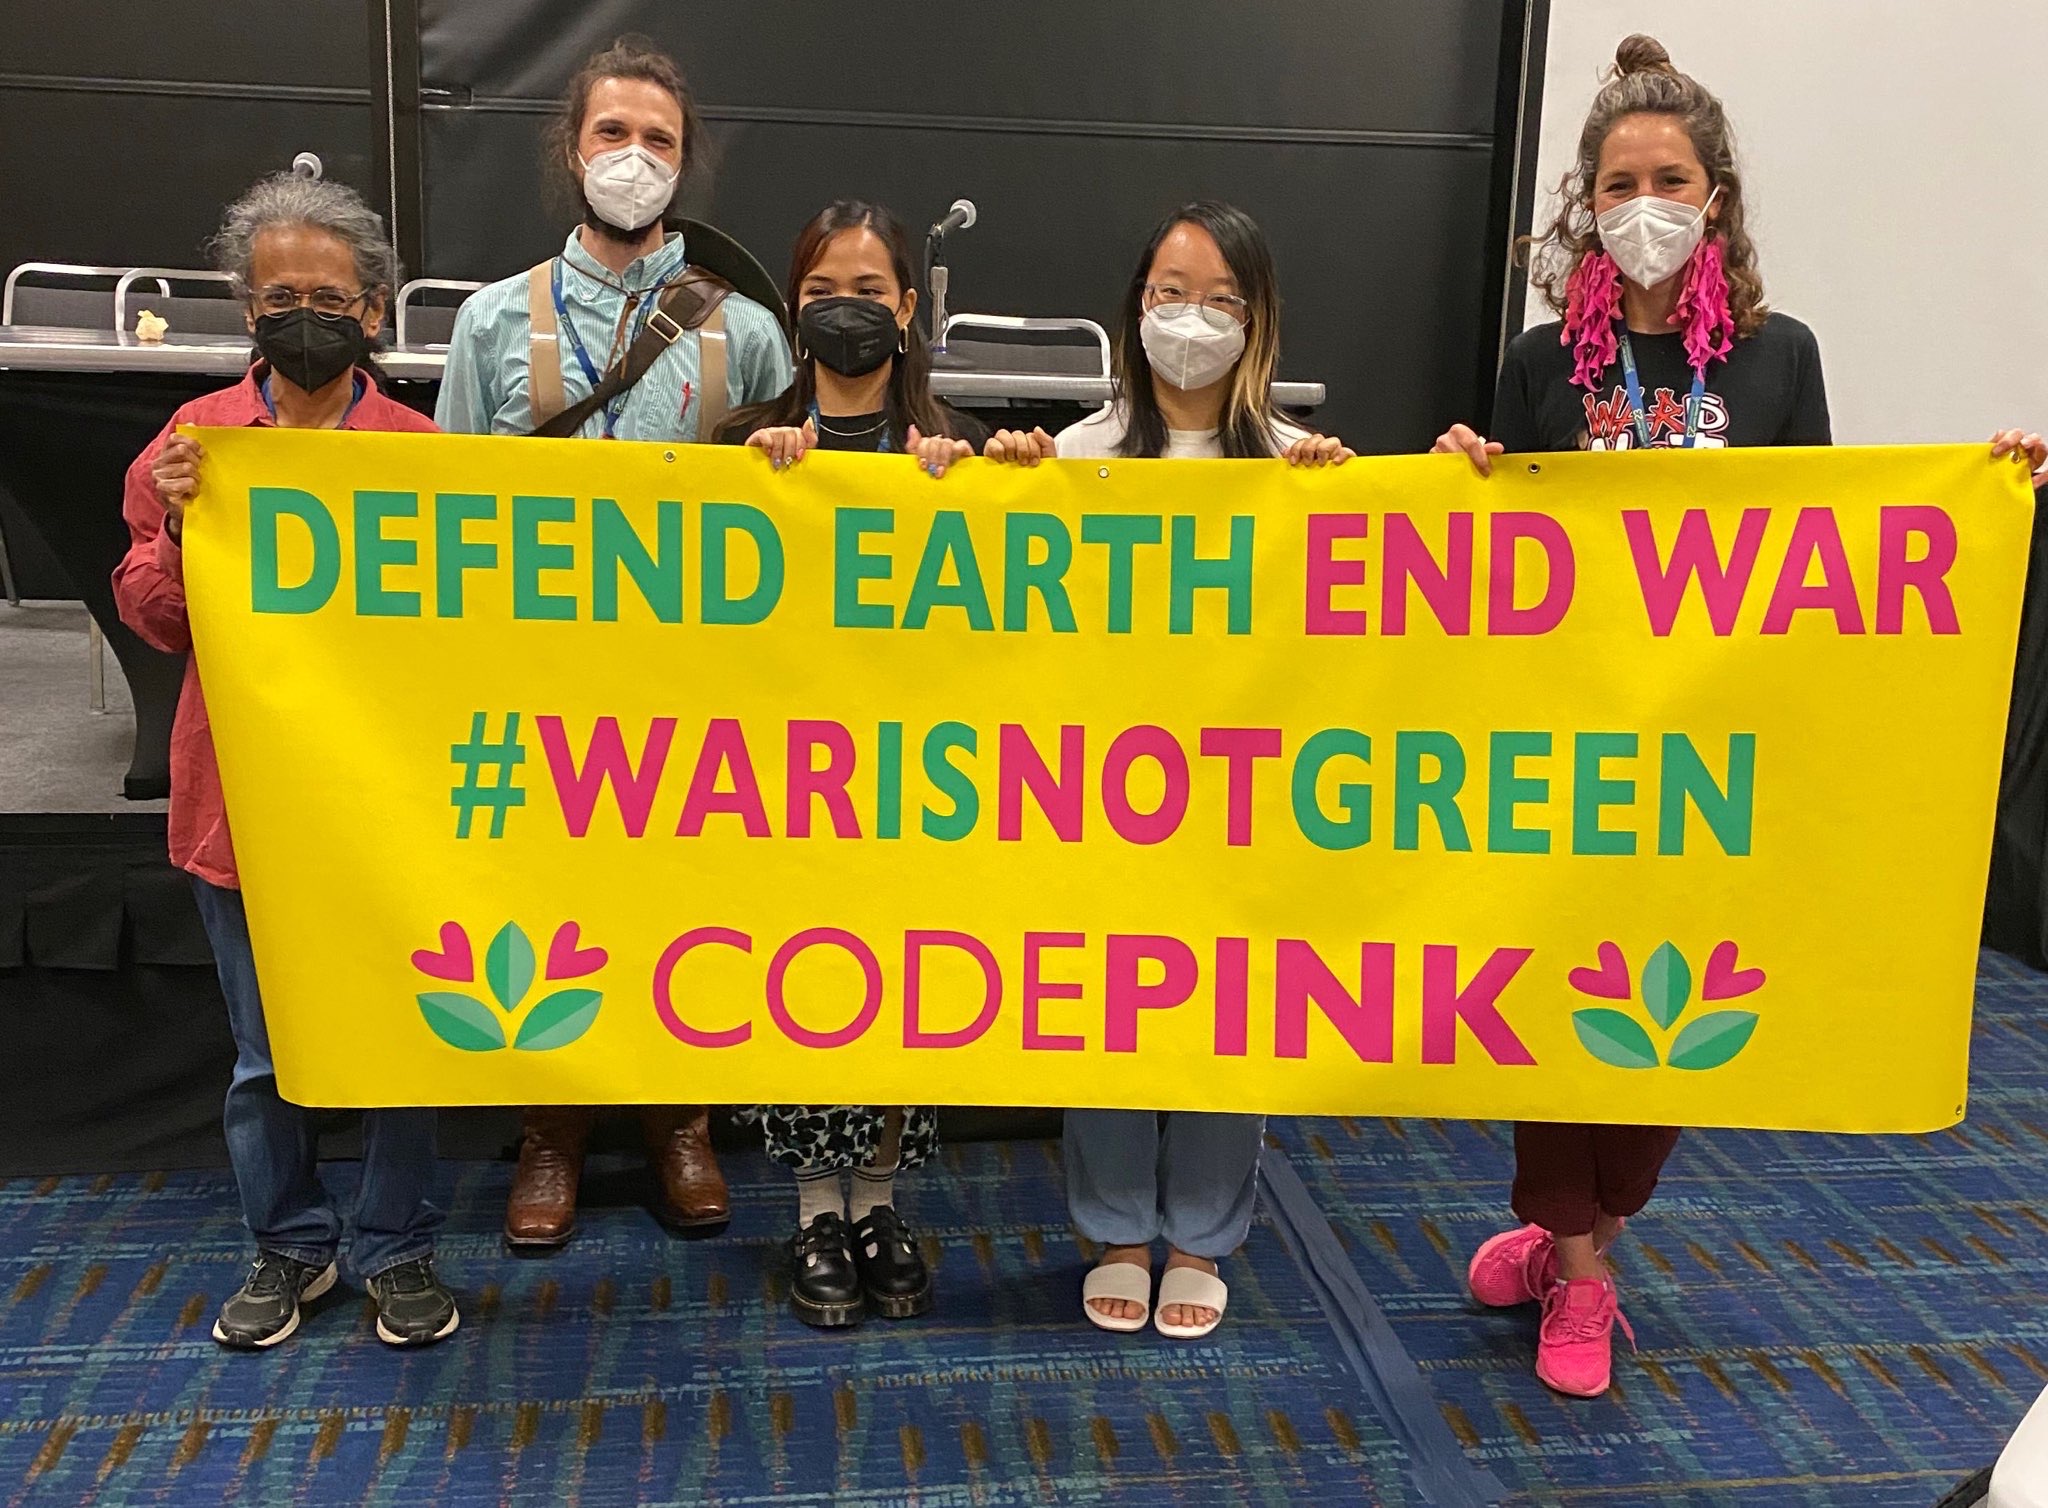 Five individuals from CODEPINK, Dissenters, Institute for Policy Studies, and Veterans for Peace hold up a banner saying "Defend Earth Not War #WarIsNotGreen CODEPINK"